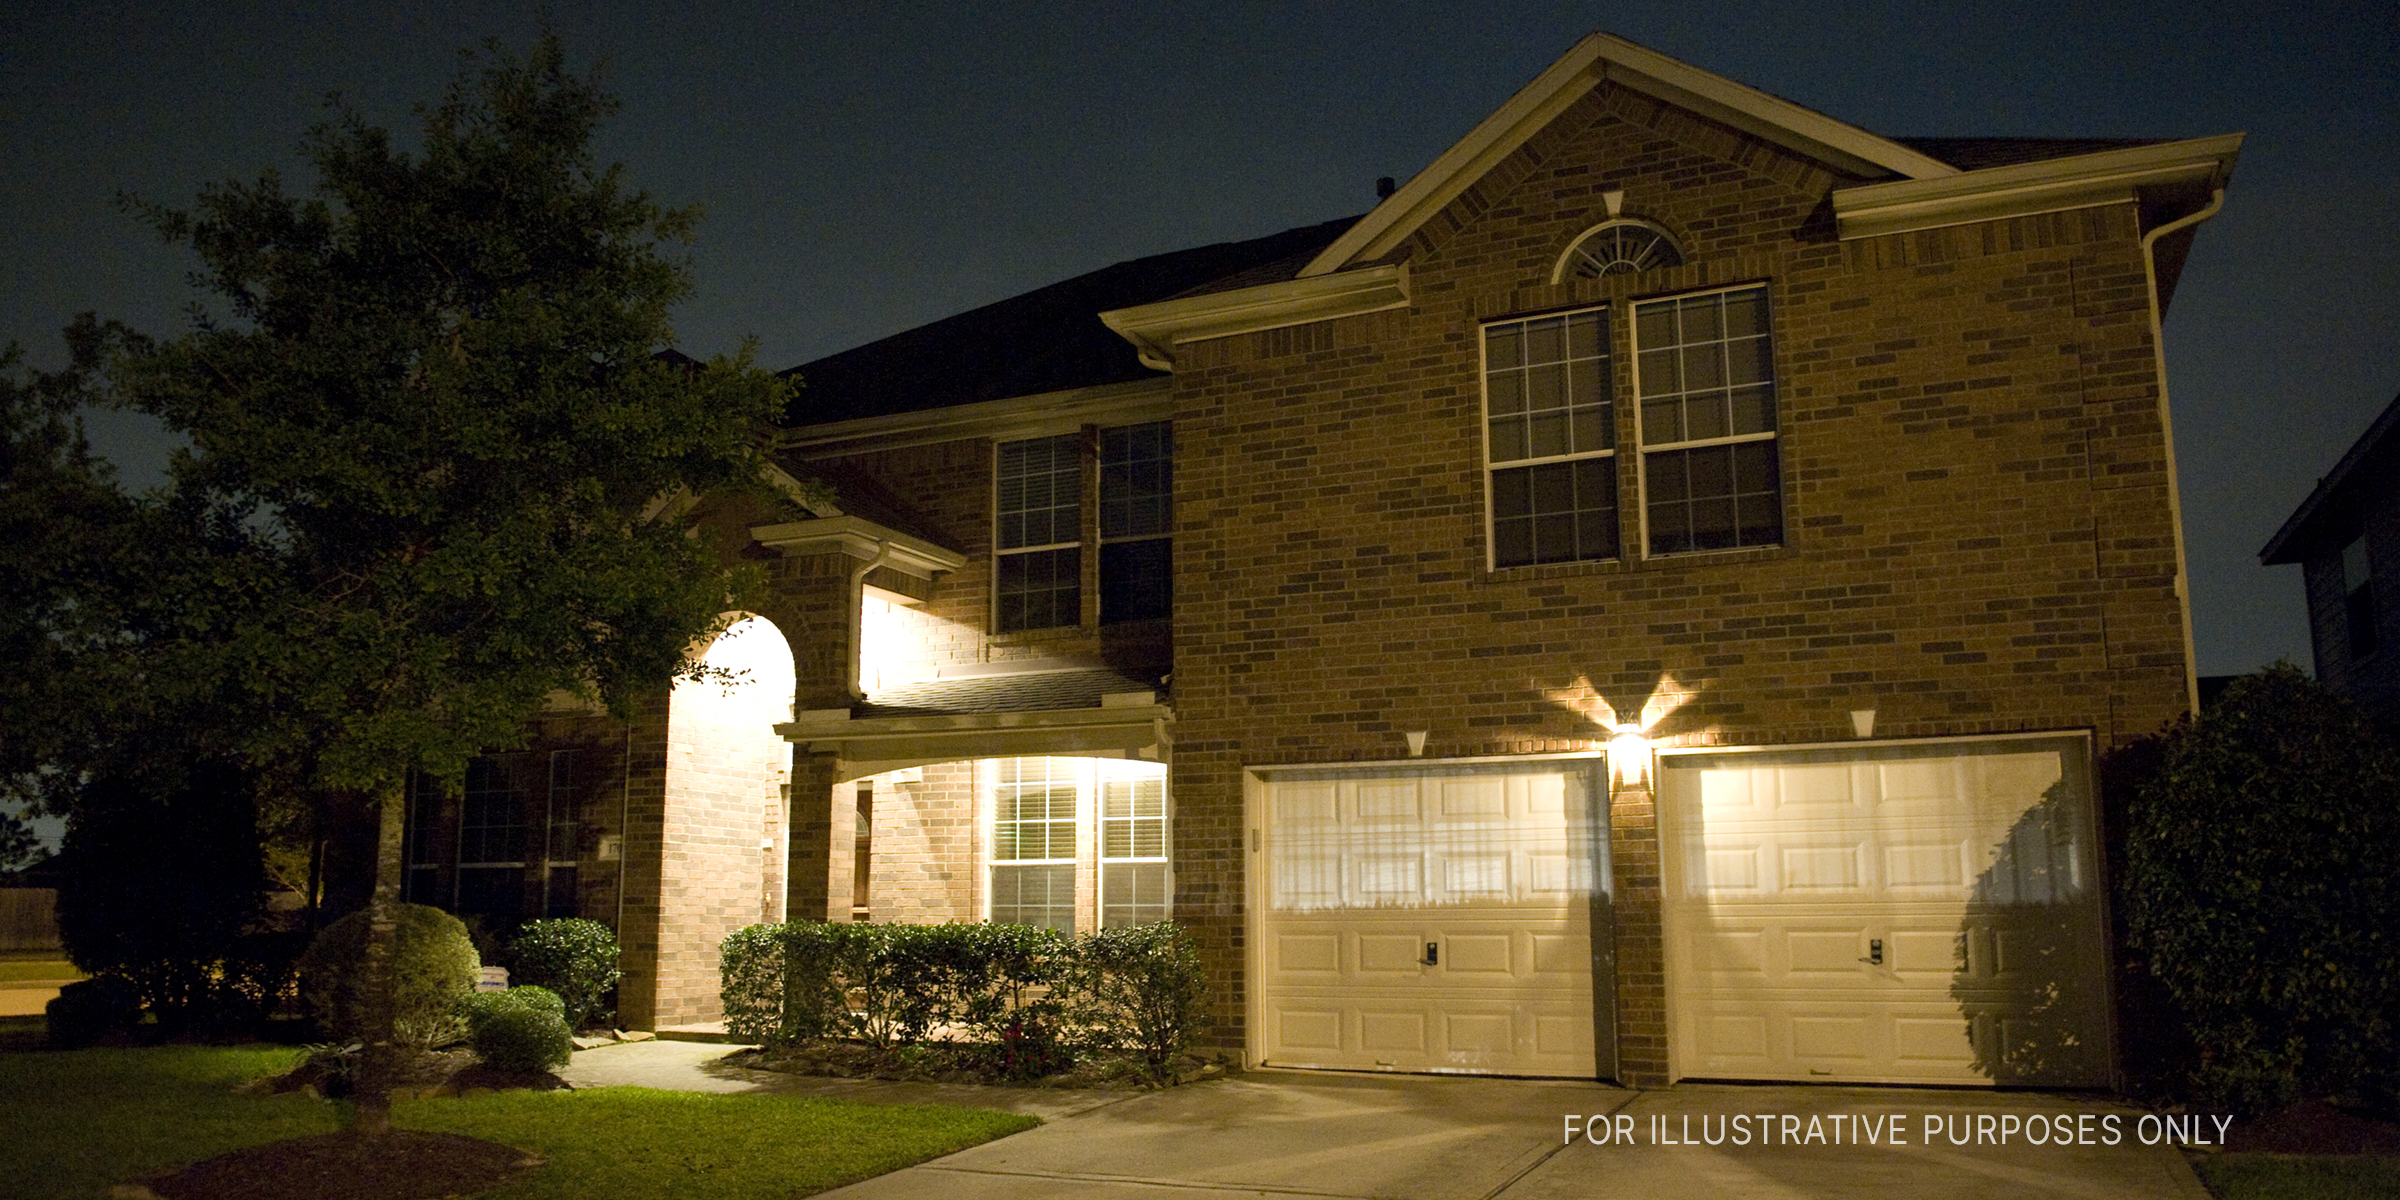 Suburban house at night. | Source: Flickr / gsloan (CC BY 2.0)